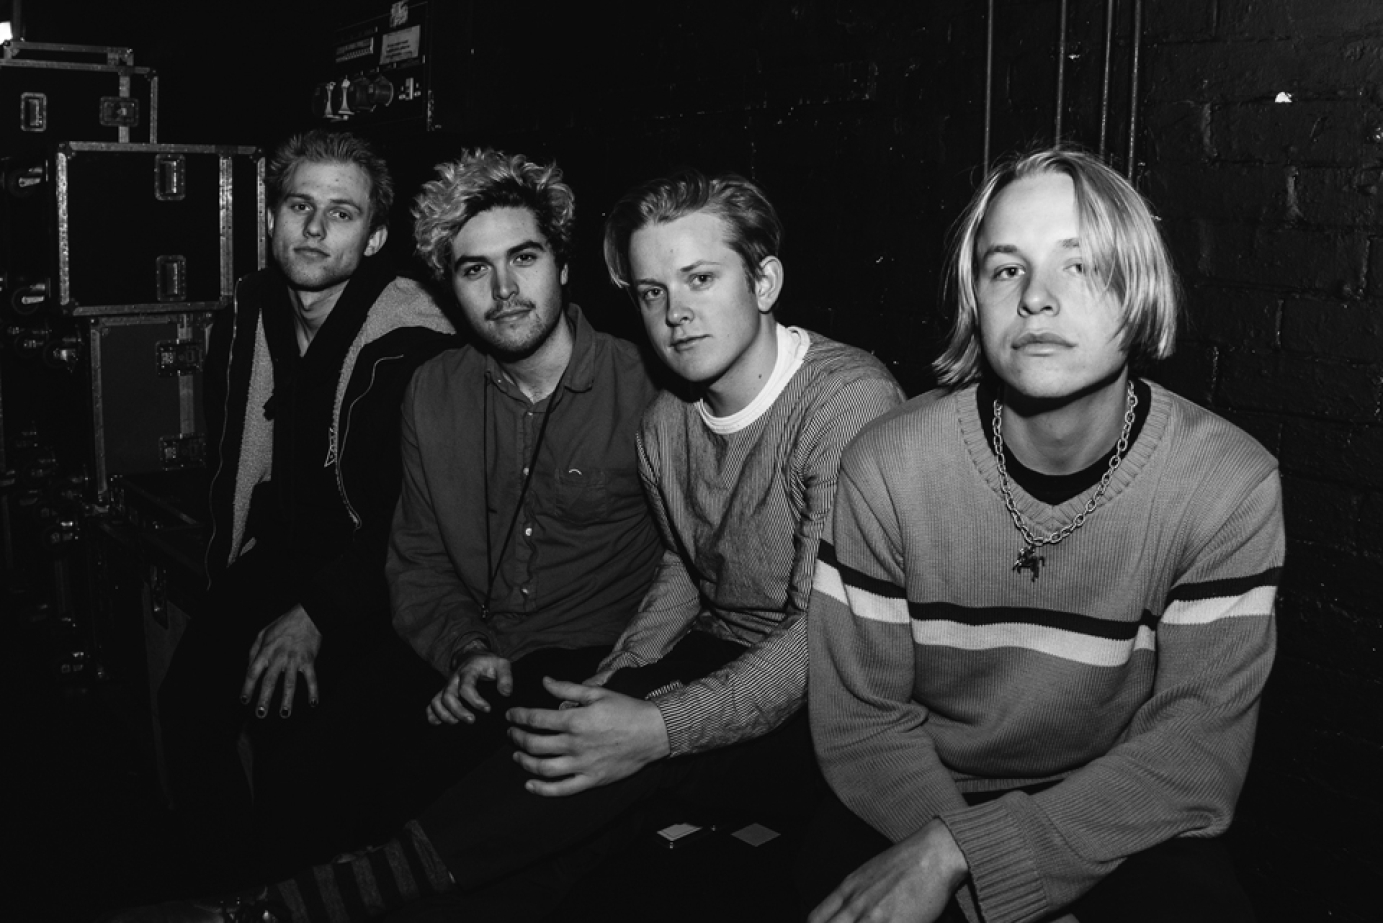 Photography for SWMRS by Andy Sawyer